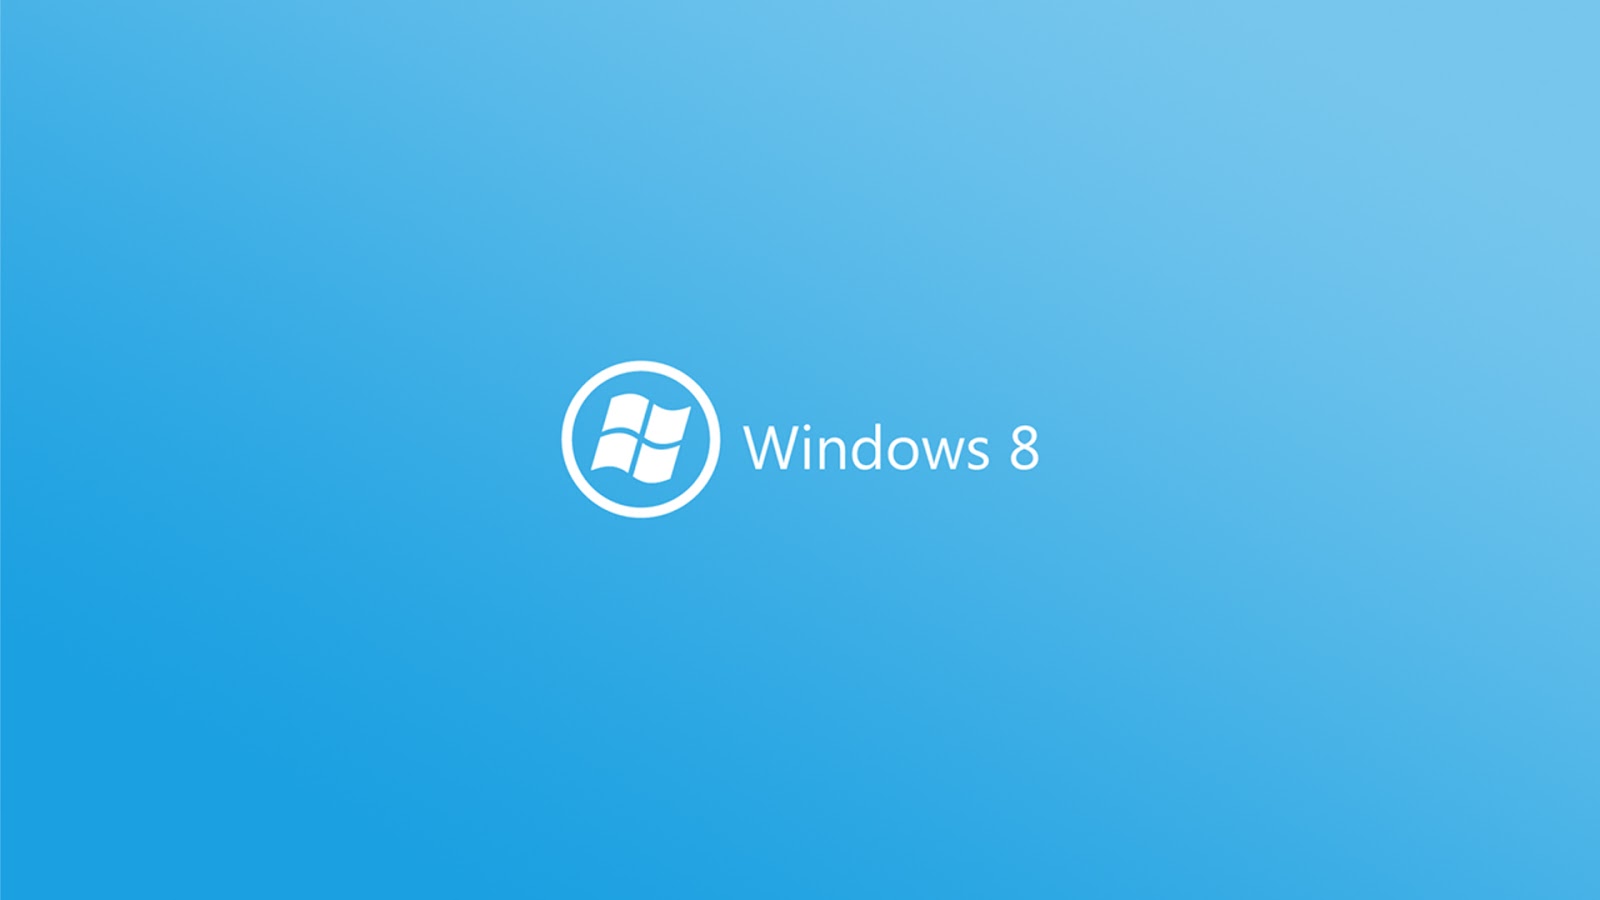 Windows 8 Full HD wallpapers 1080p | HD Wallpapers (High ...